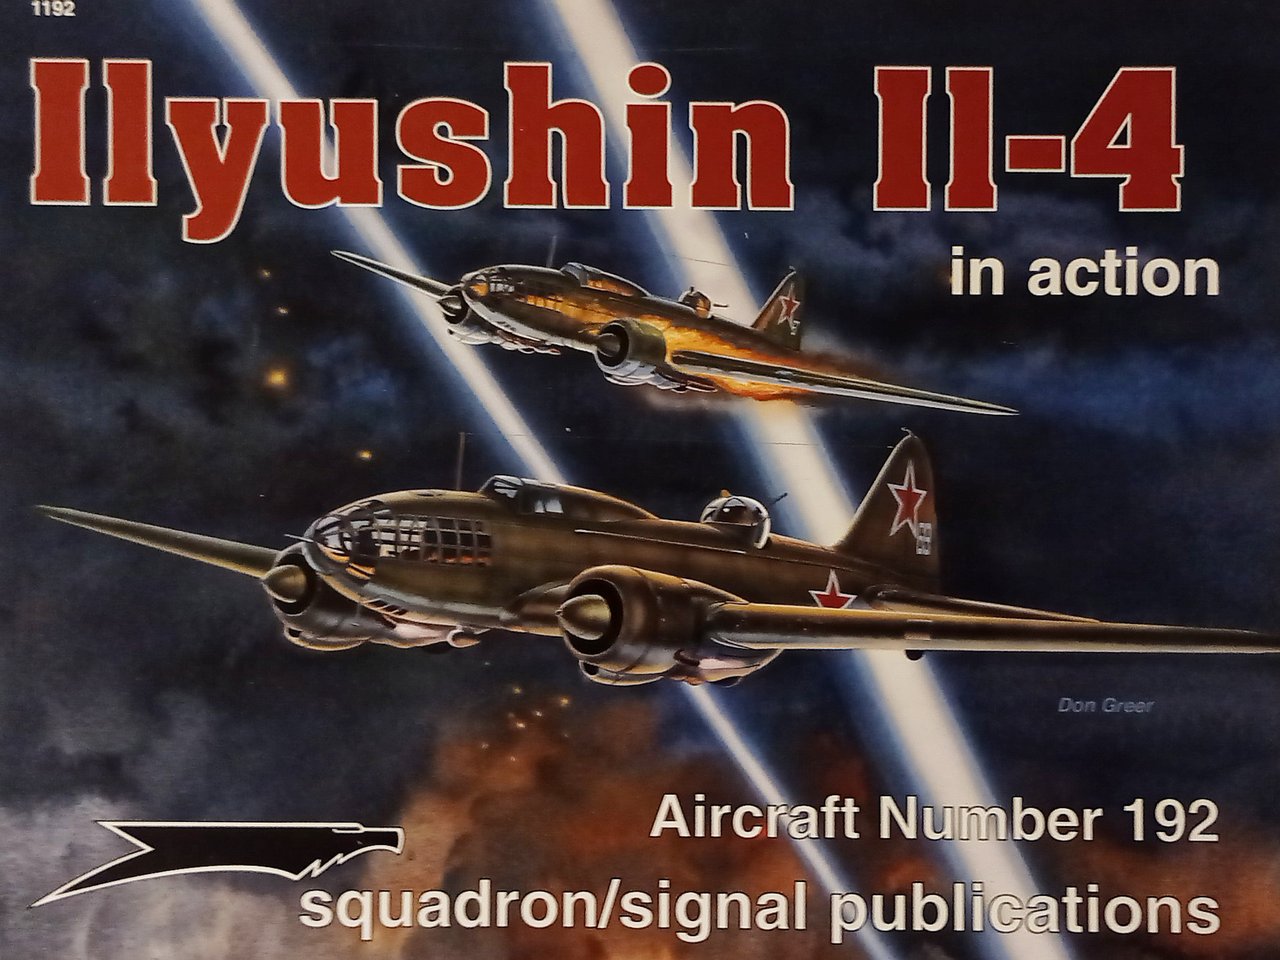 Aircraft N. 192 - Ilyushin II-4 in Action in Action …